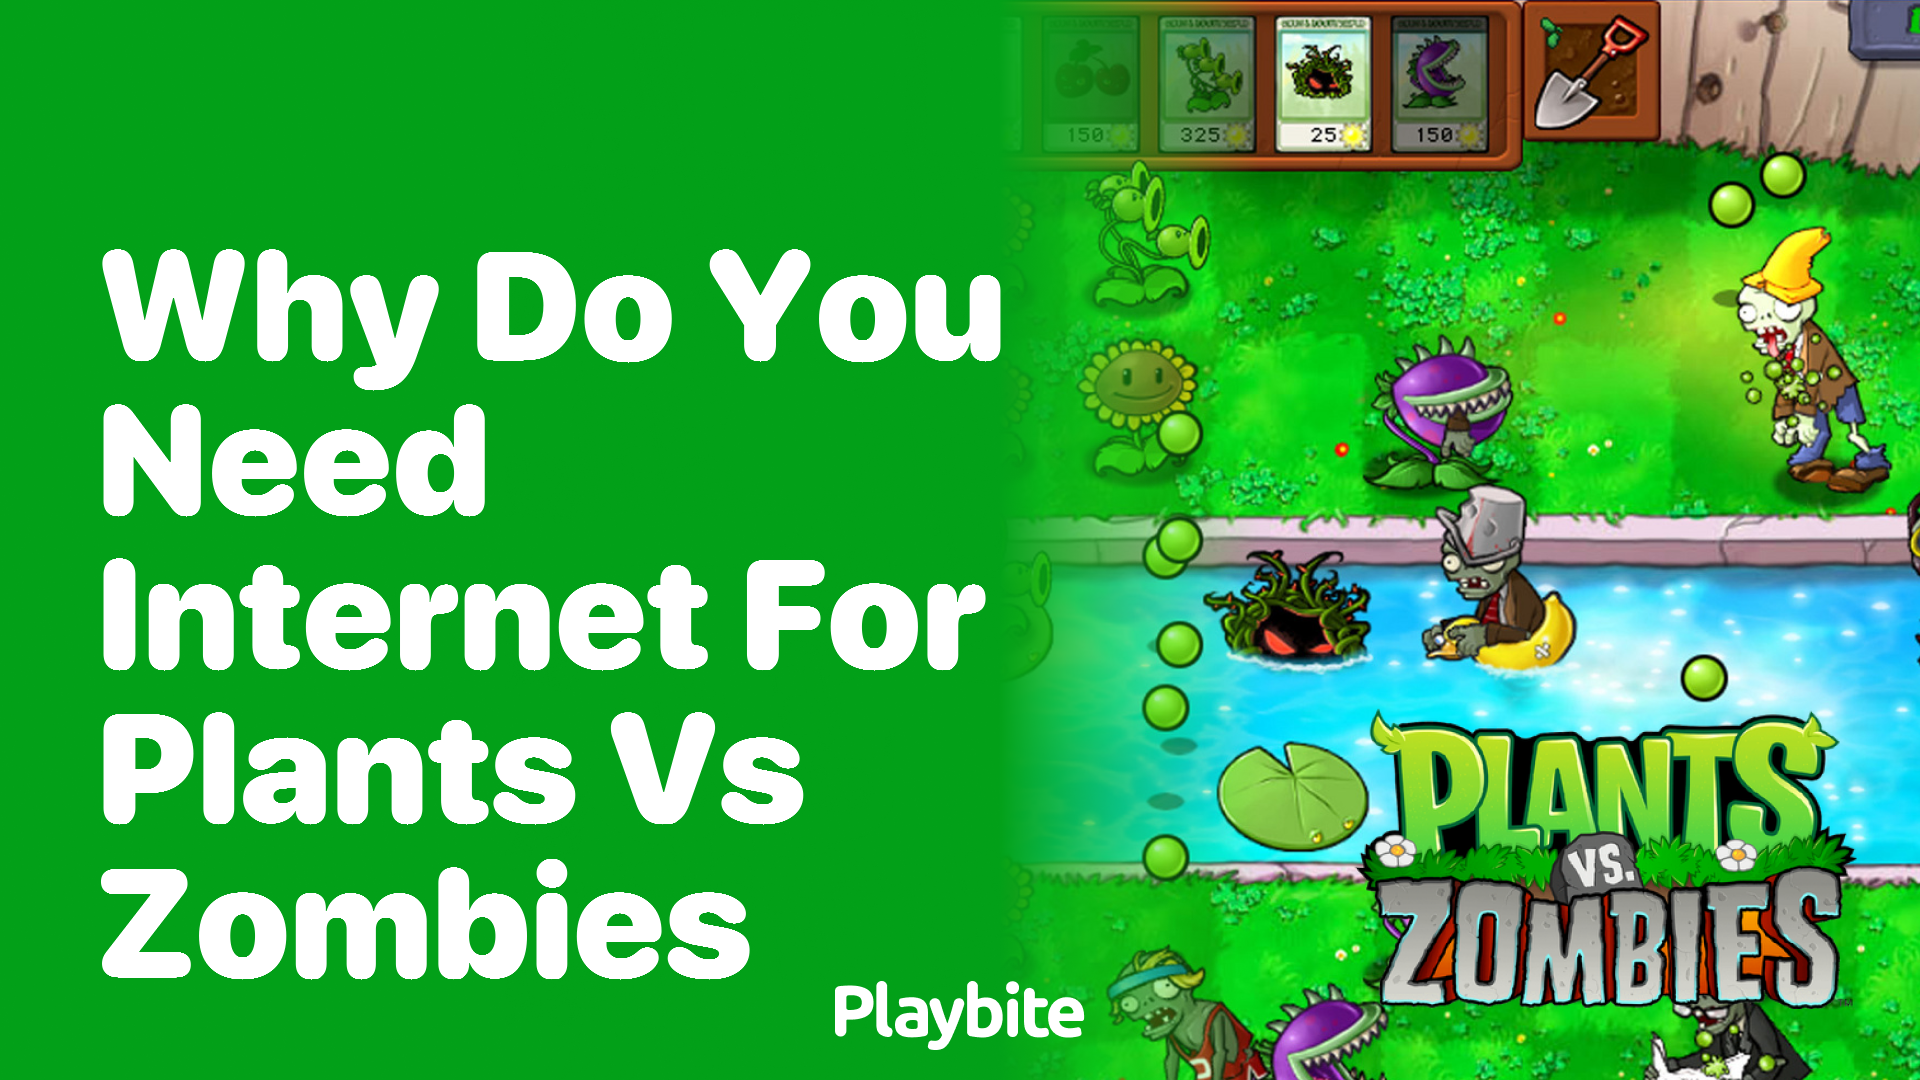 Why Do You Need Internet for Plants vs Zombies?